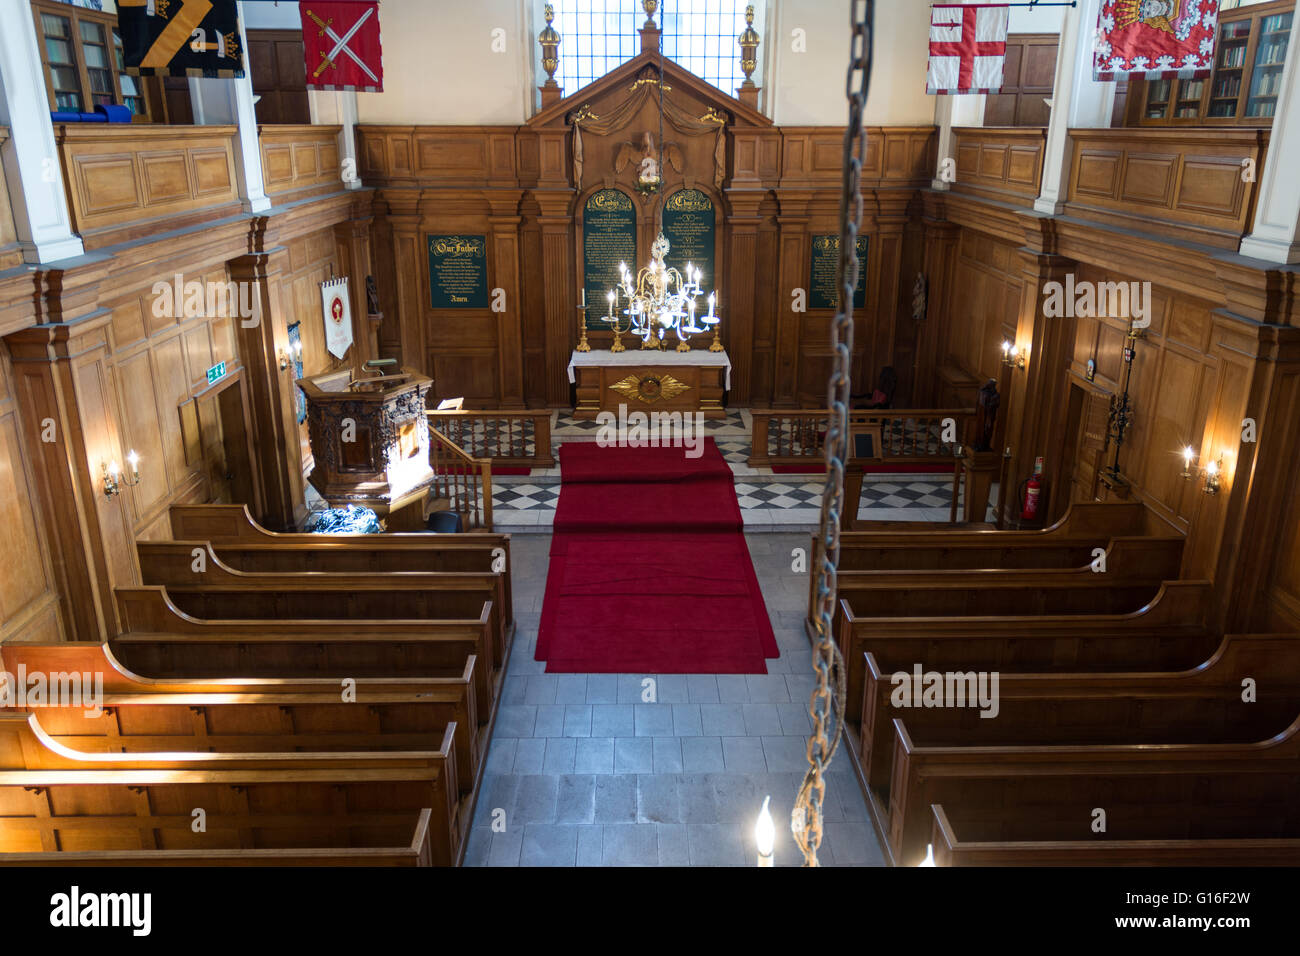 Interior of the main hall at St Andrew's church Stock Photo